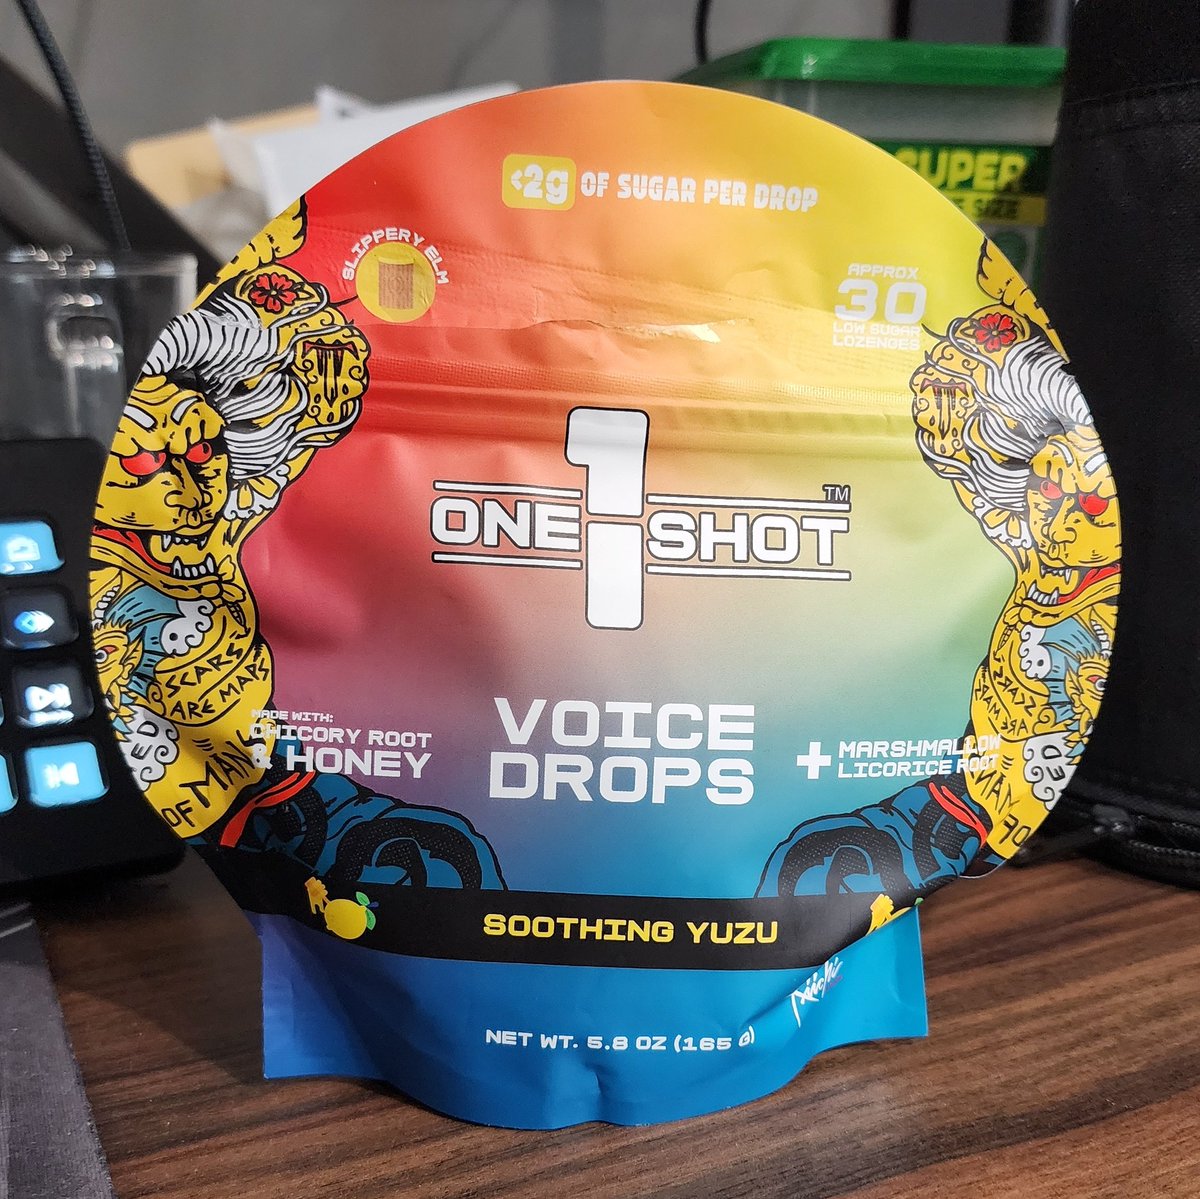 These things saved my throat / voice during my San Francisco trip Scratchy throat from travelling / voice use completely eliminated by popping one of these Make sure to use code CHAIN when you're buying yours so they know I sent ya 😎 1shotenergy.com/?ref=CHAIN #ad